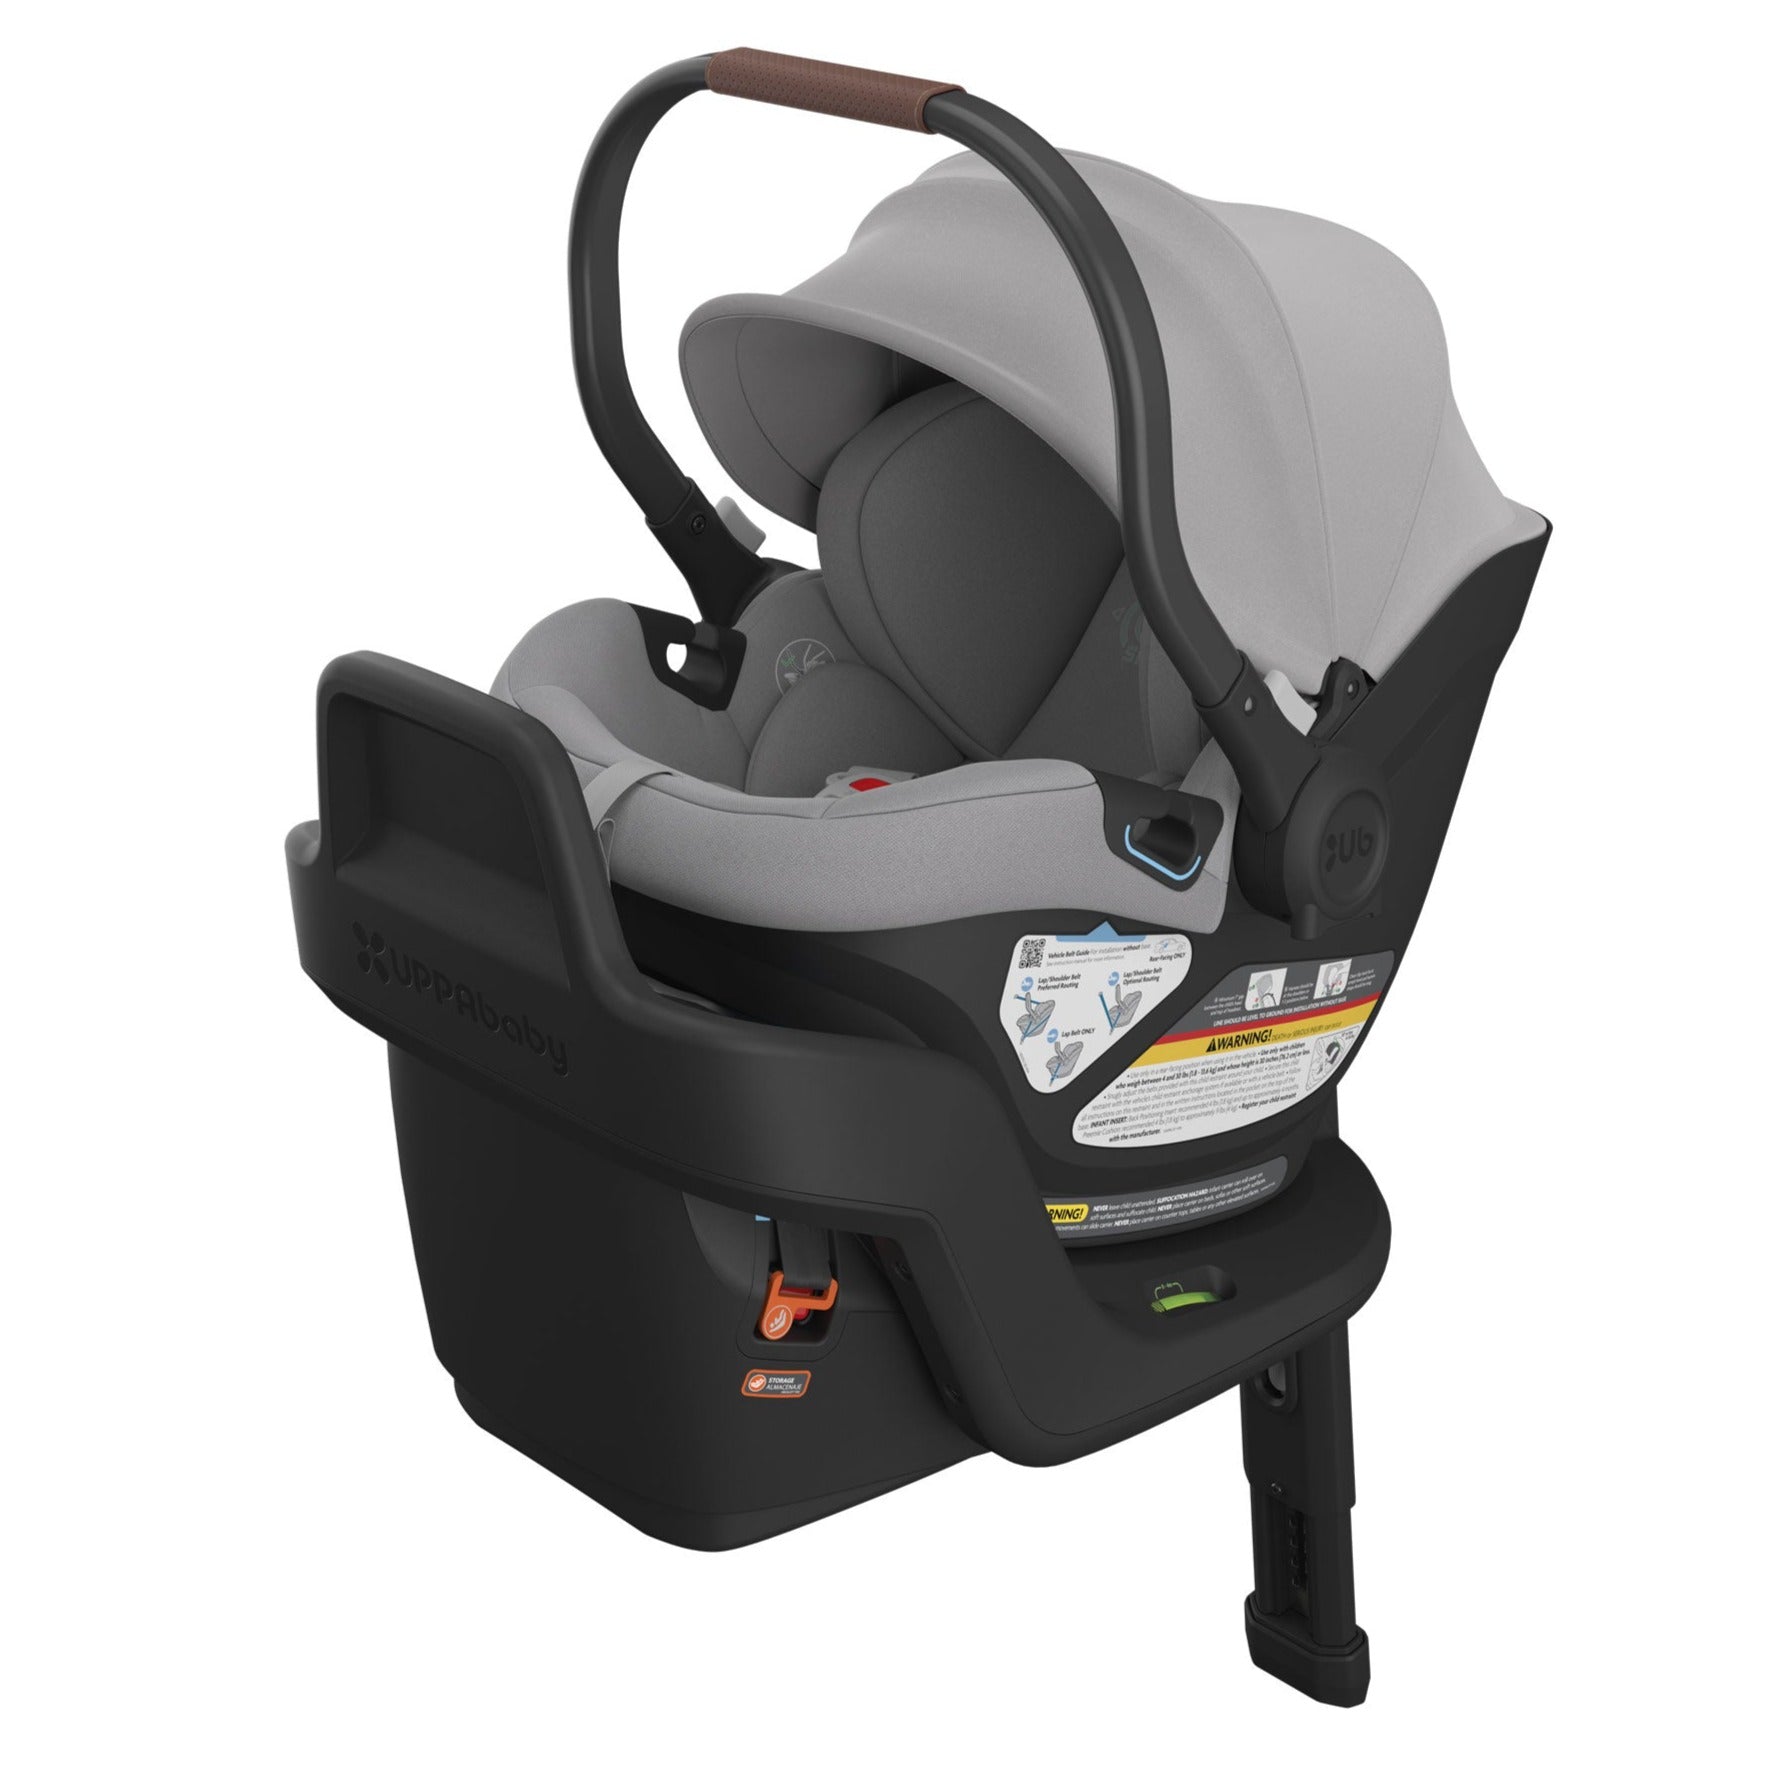 UPPAbaby ARIA Infant Car Seat - ANTHONY (Light Grey)